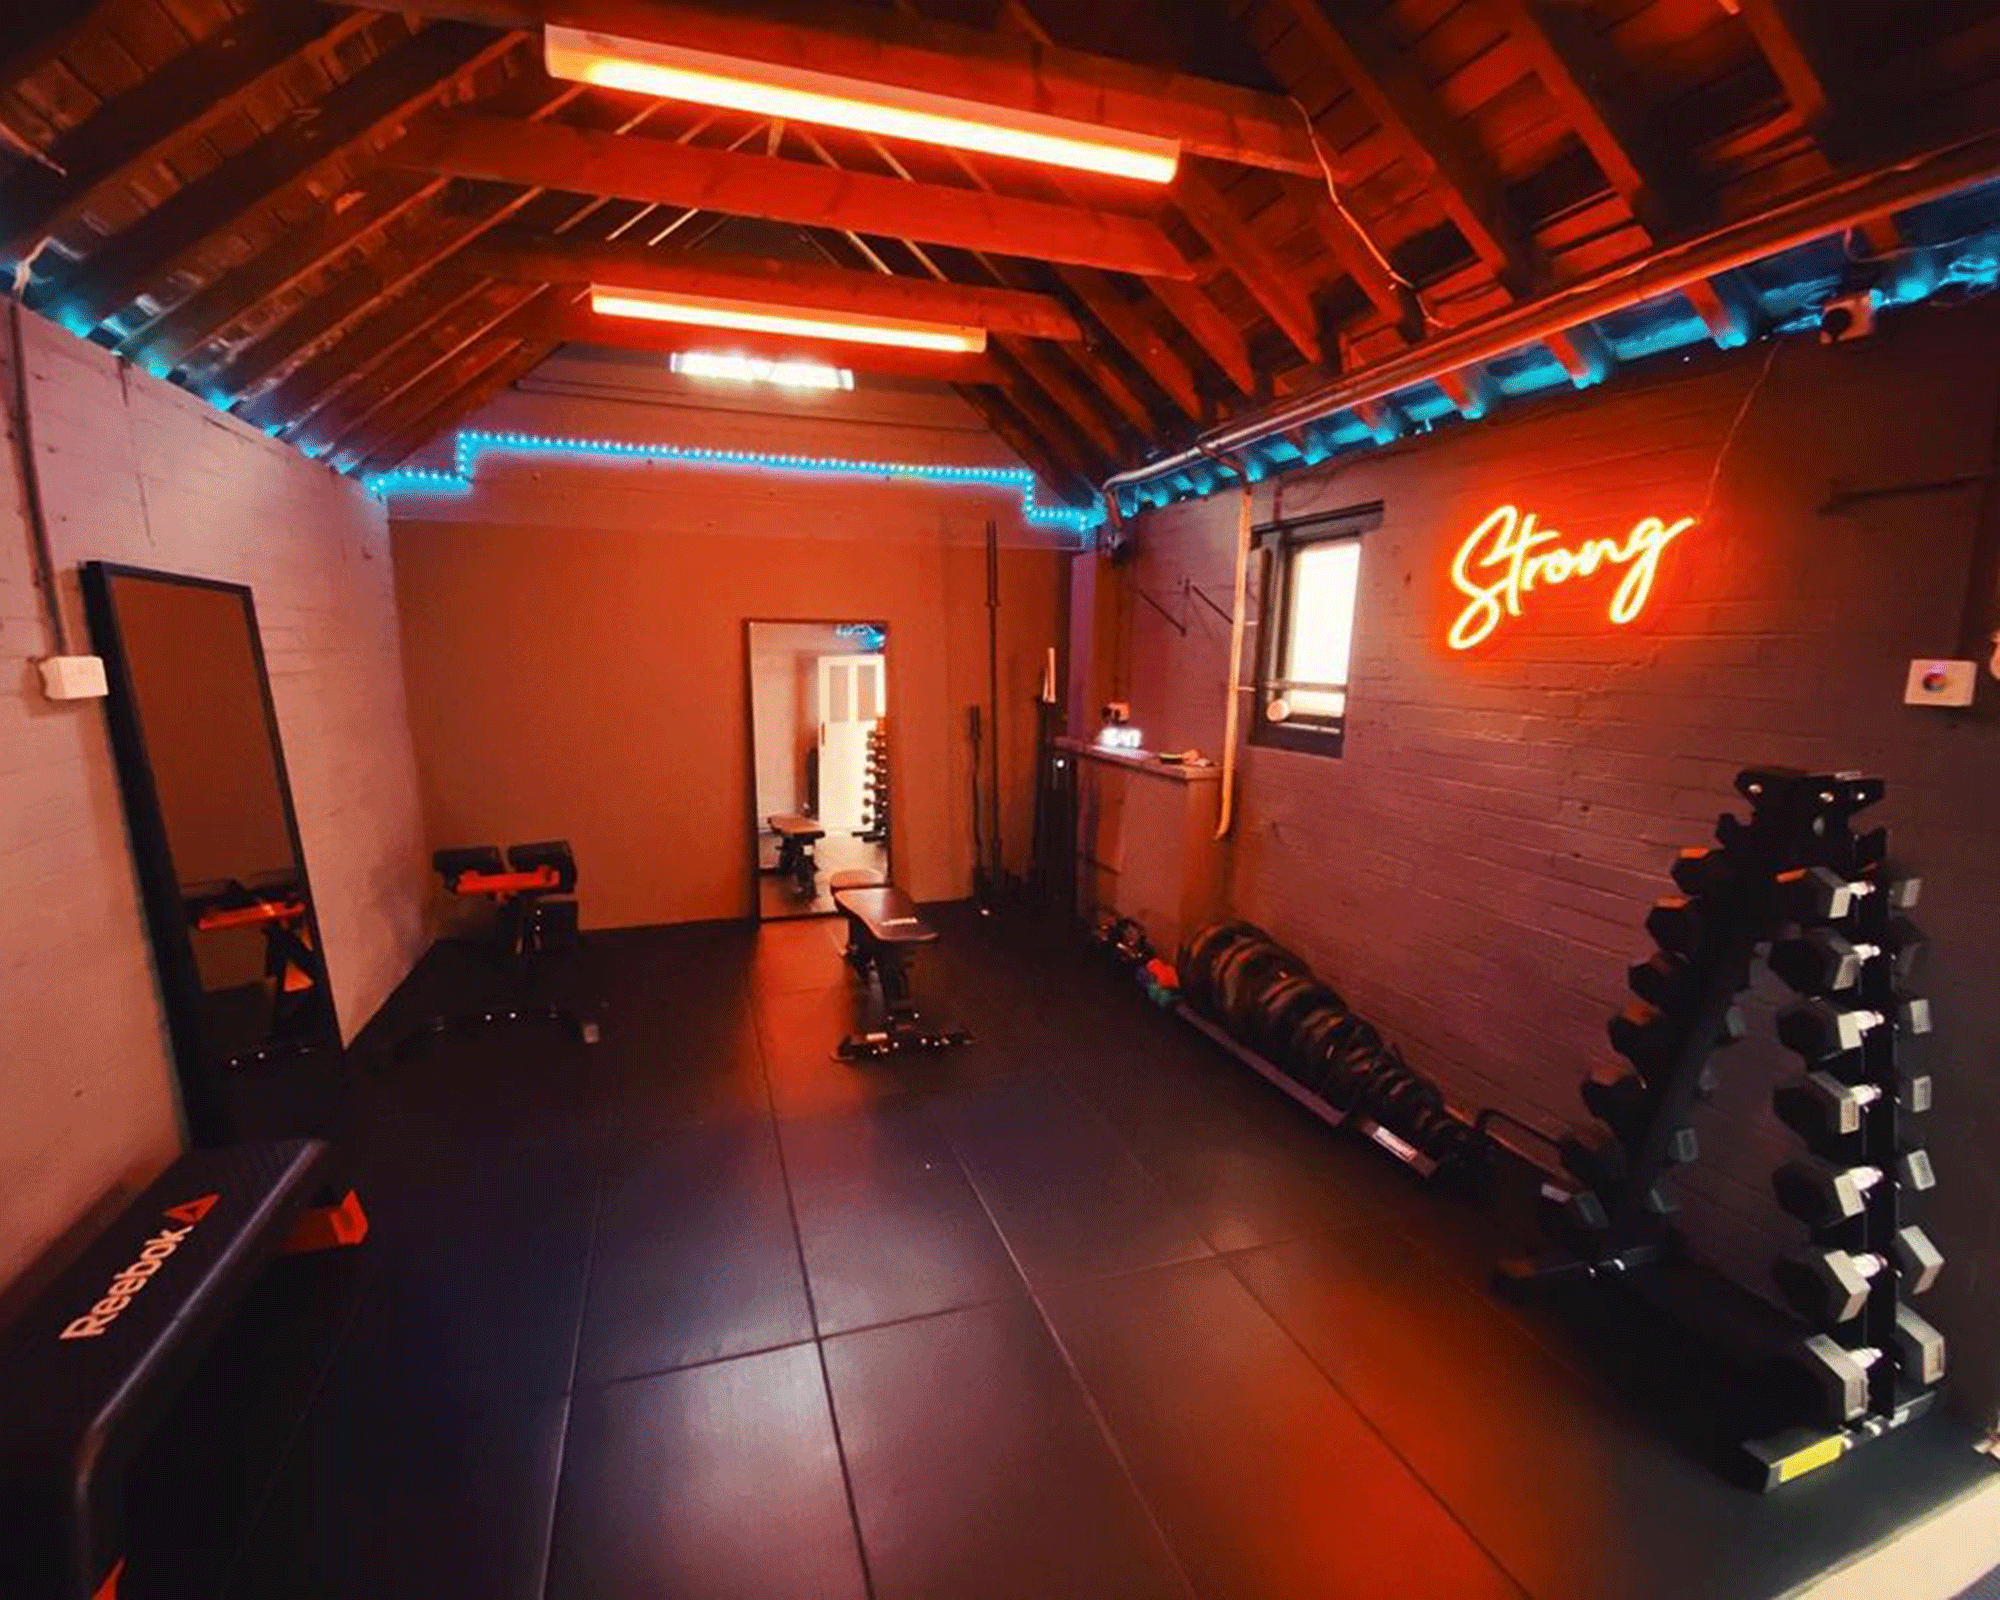 A home gym with red mood lighting and neon 'Strong' light